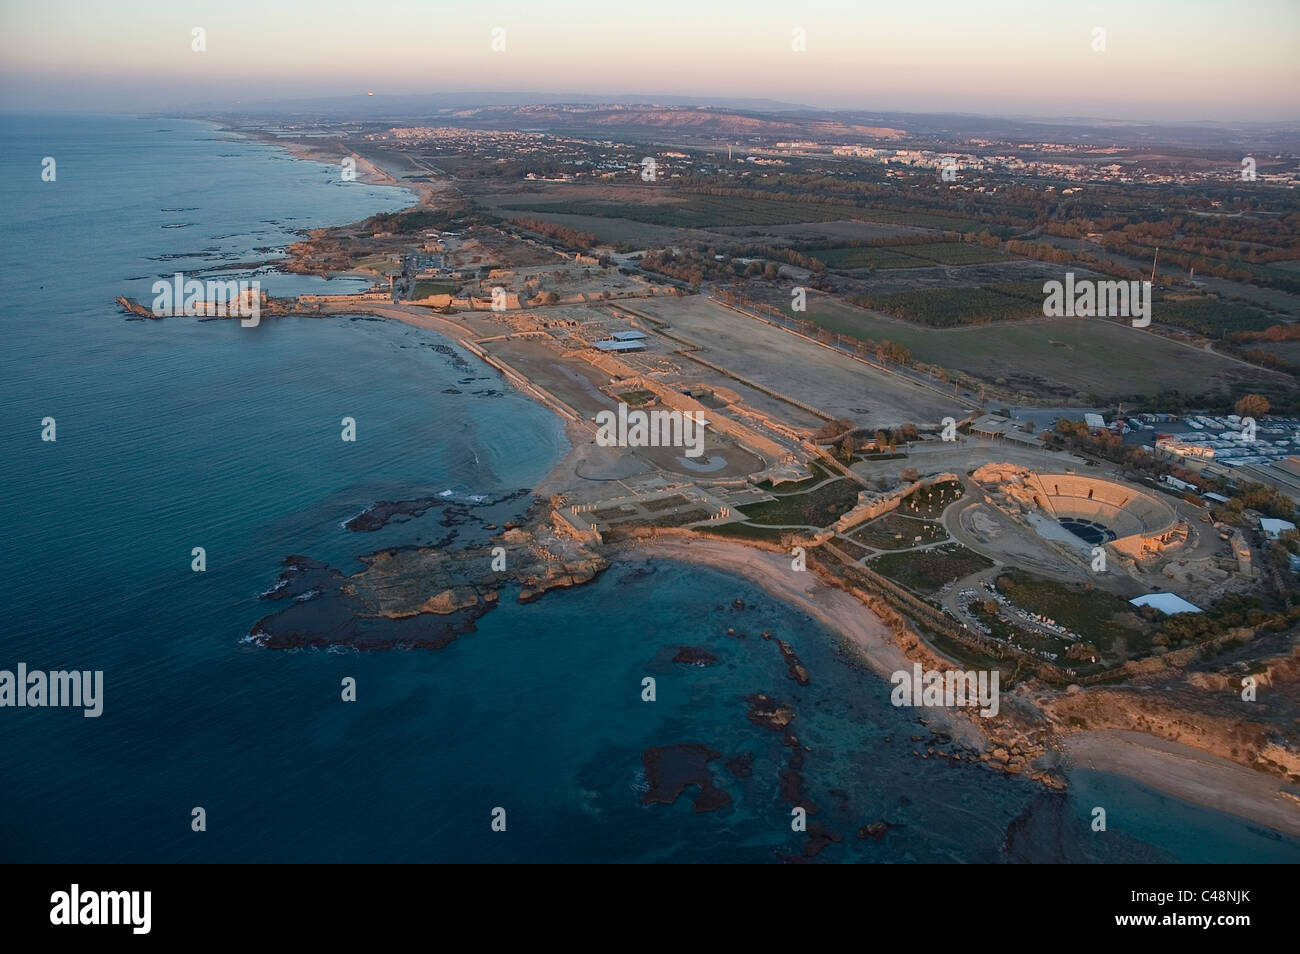 Aerial photograph of the amphitheater of the ancient city of Caesarea at sunset Stock Photo